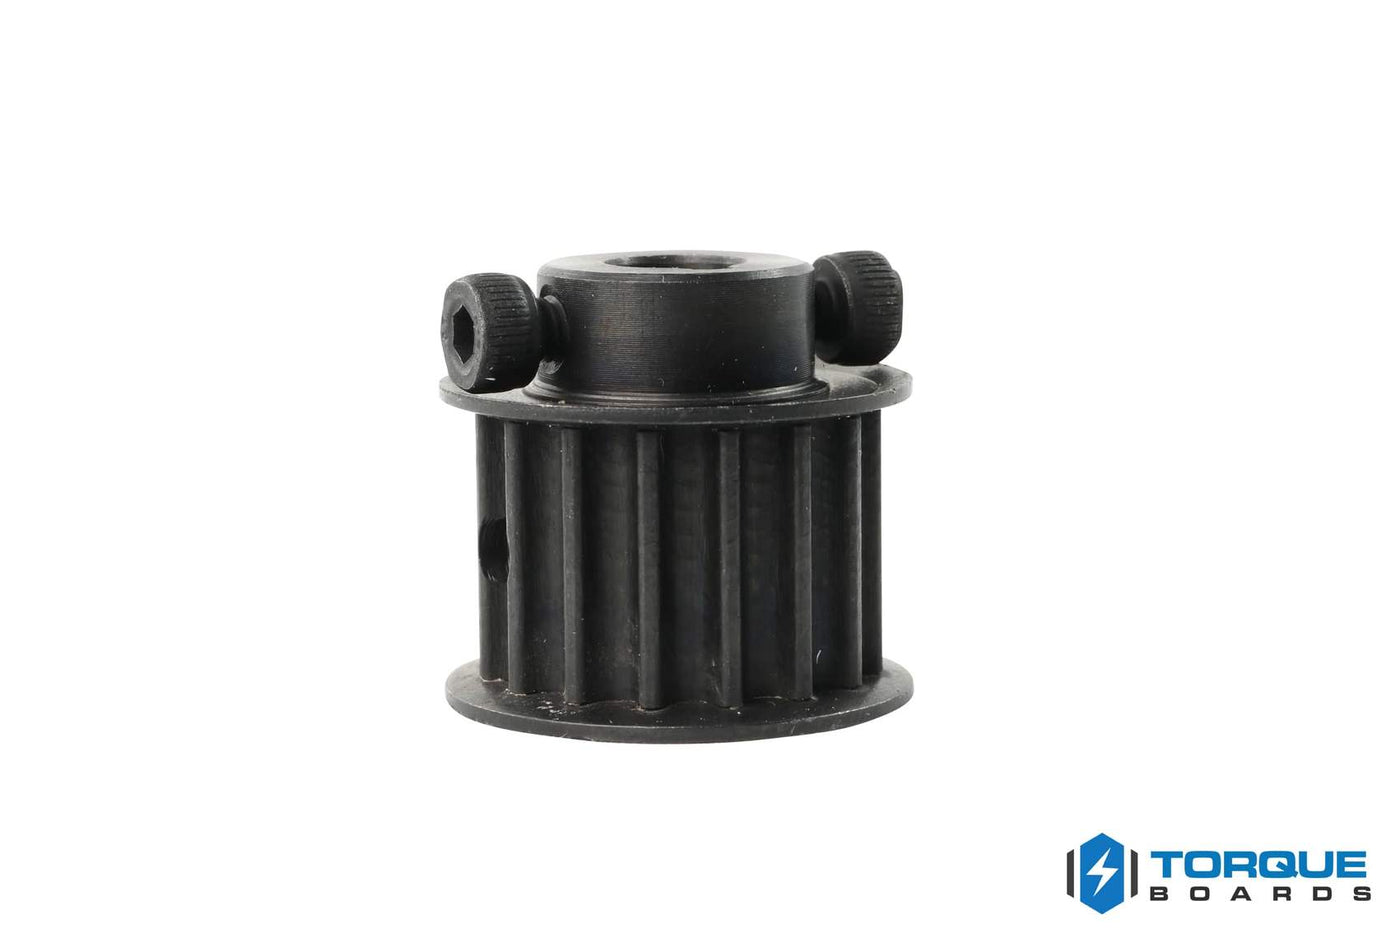 18T HTD5 15mm Motor Pulley